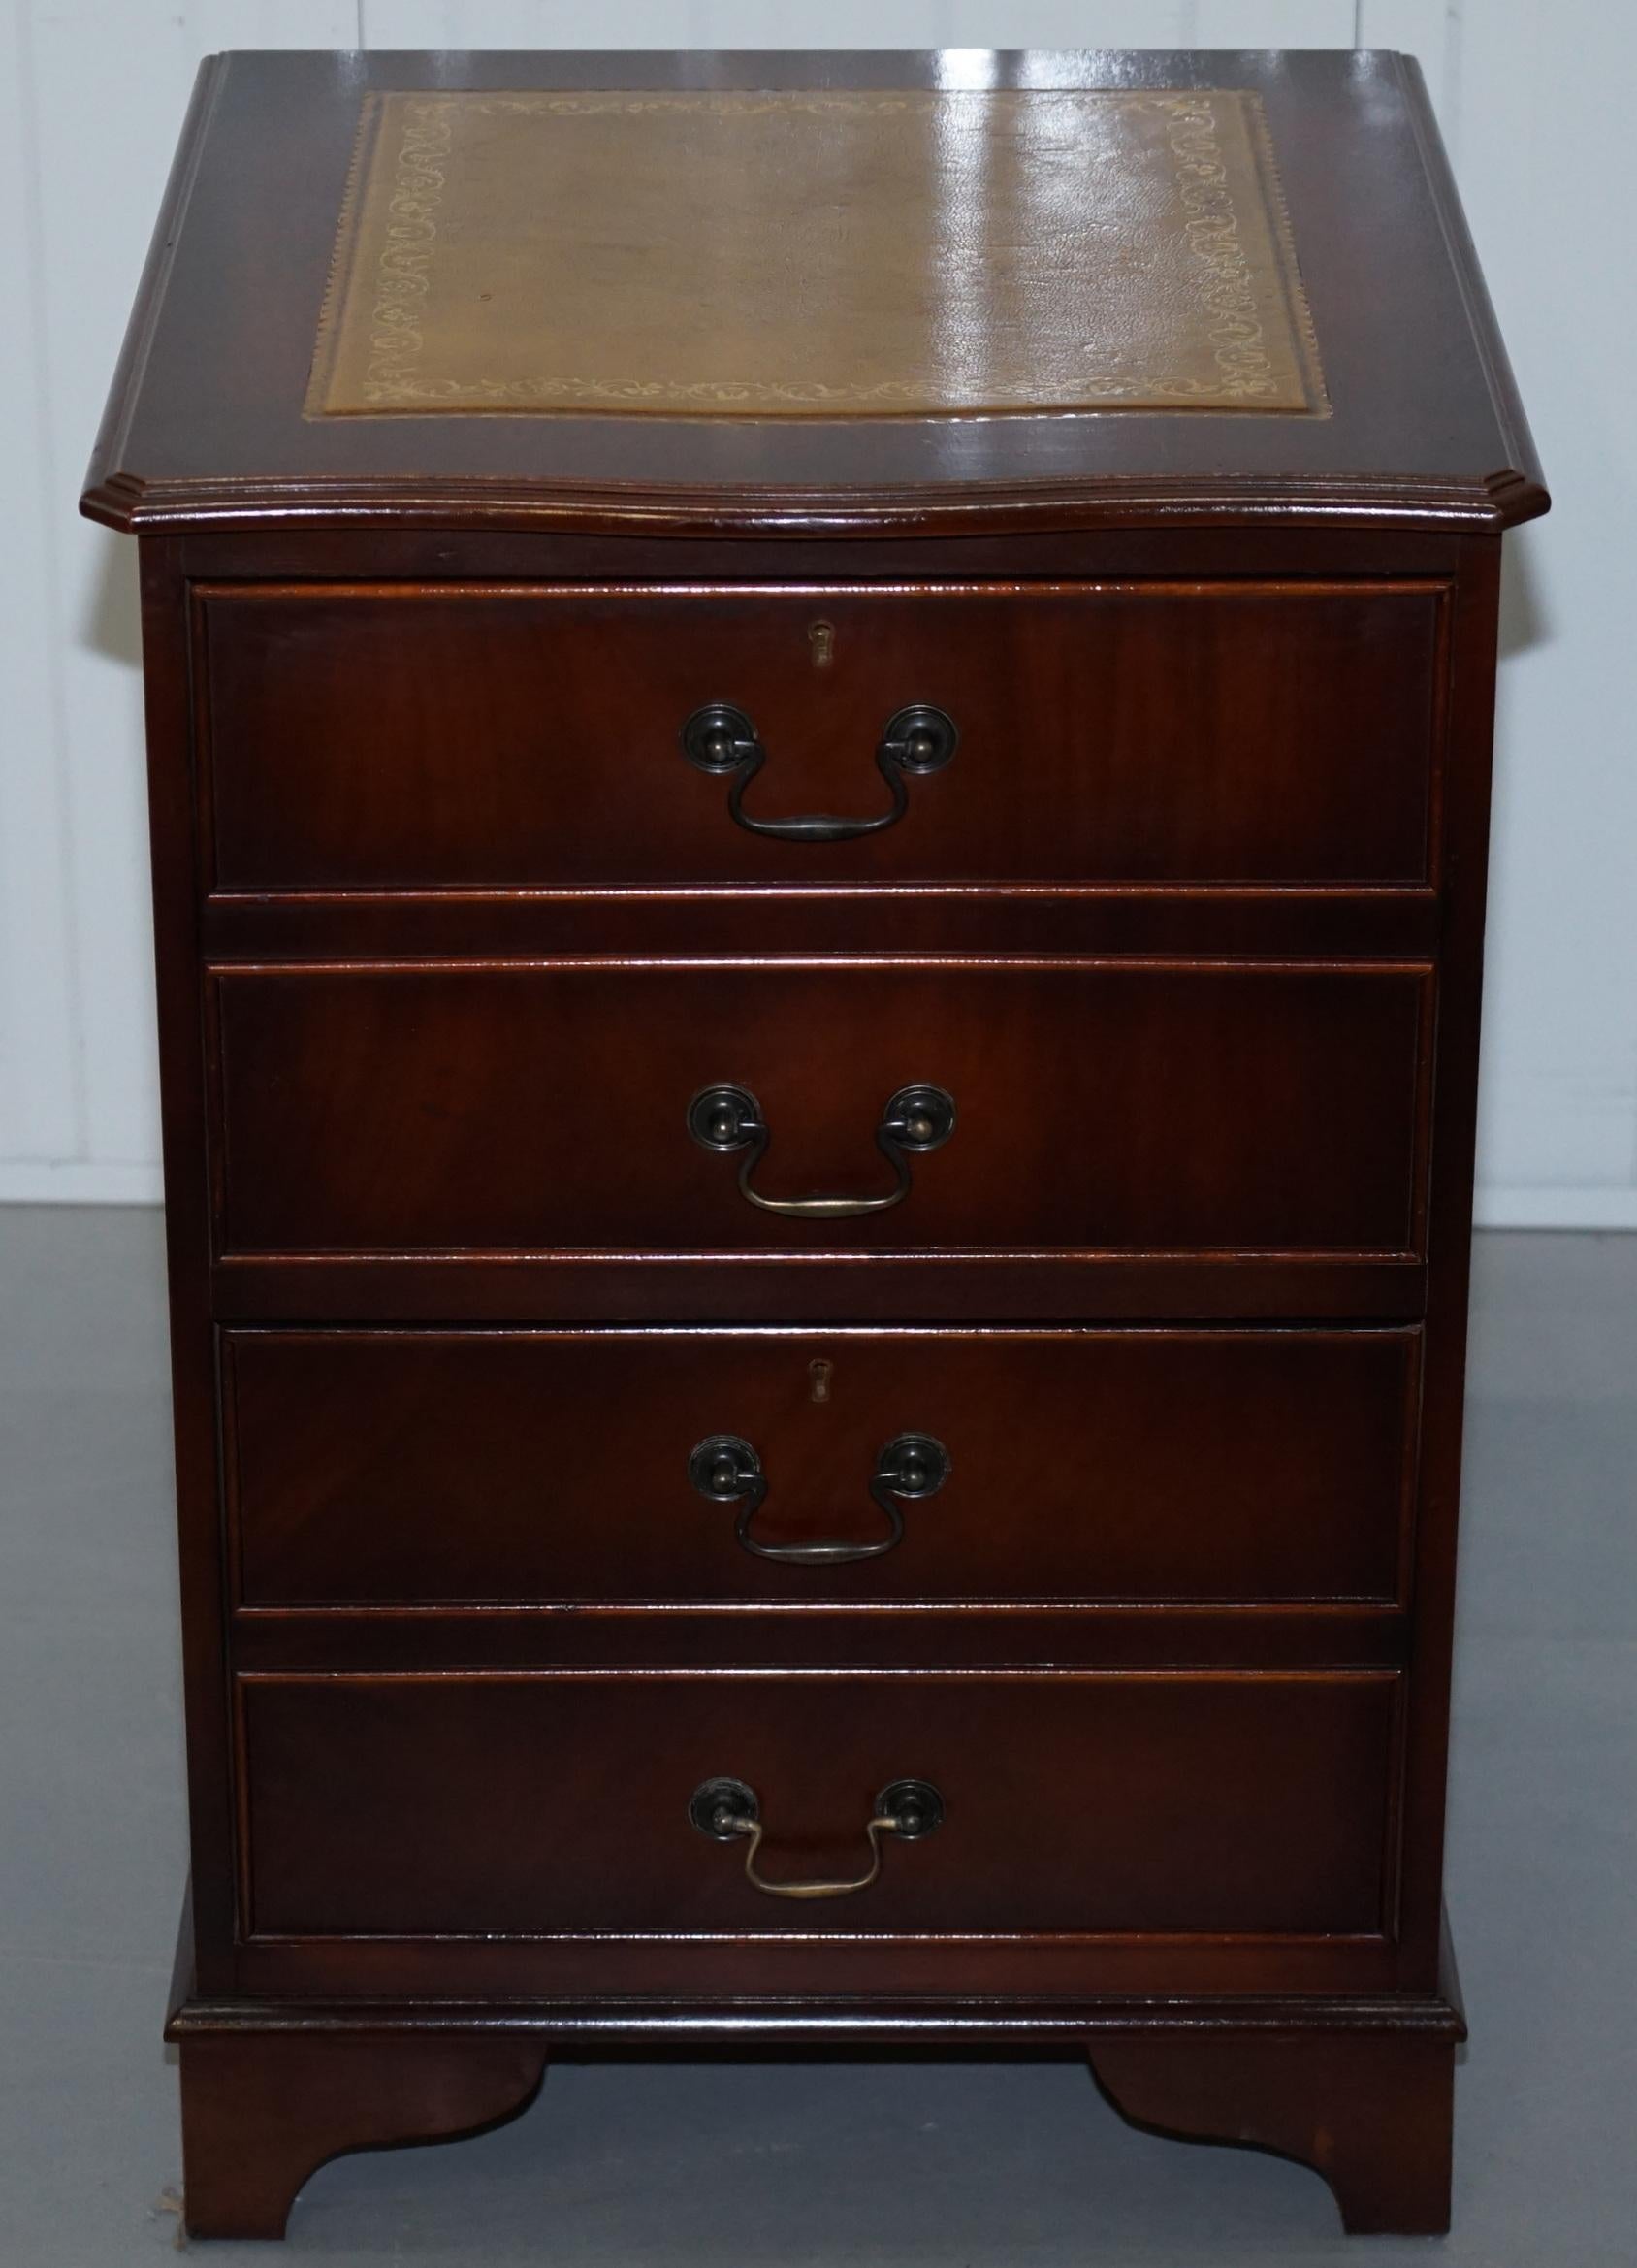 We are delighted to offer for sale this lovely curved front mahogany with green leather writing surface filing cabinet

The front panel is as mentioned curved outwards and offers a nice little break from the norm

The green leather writing